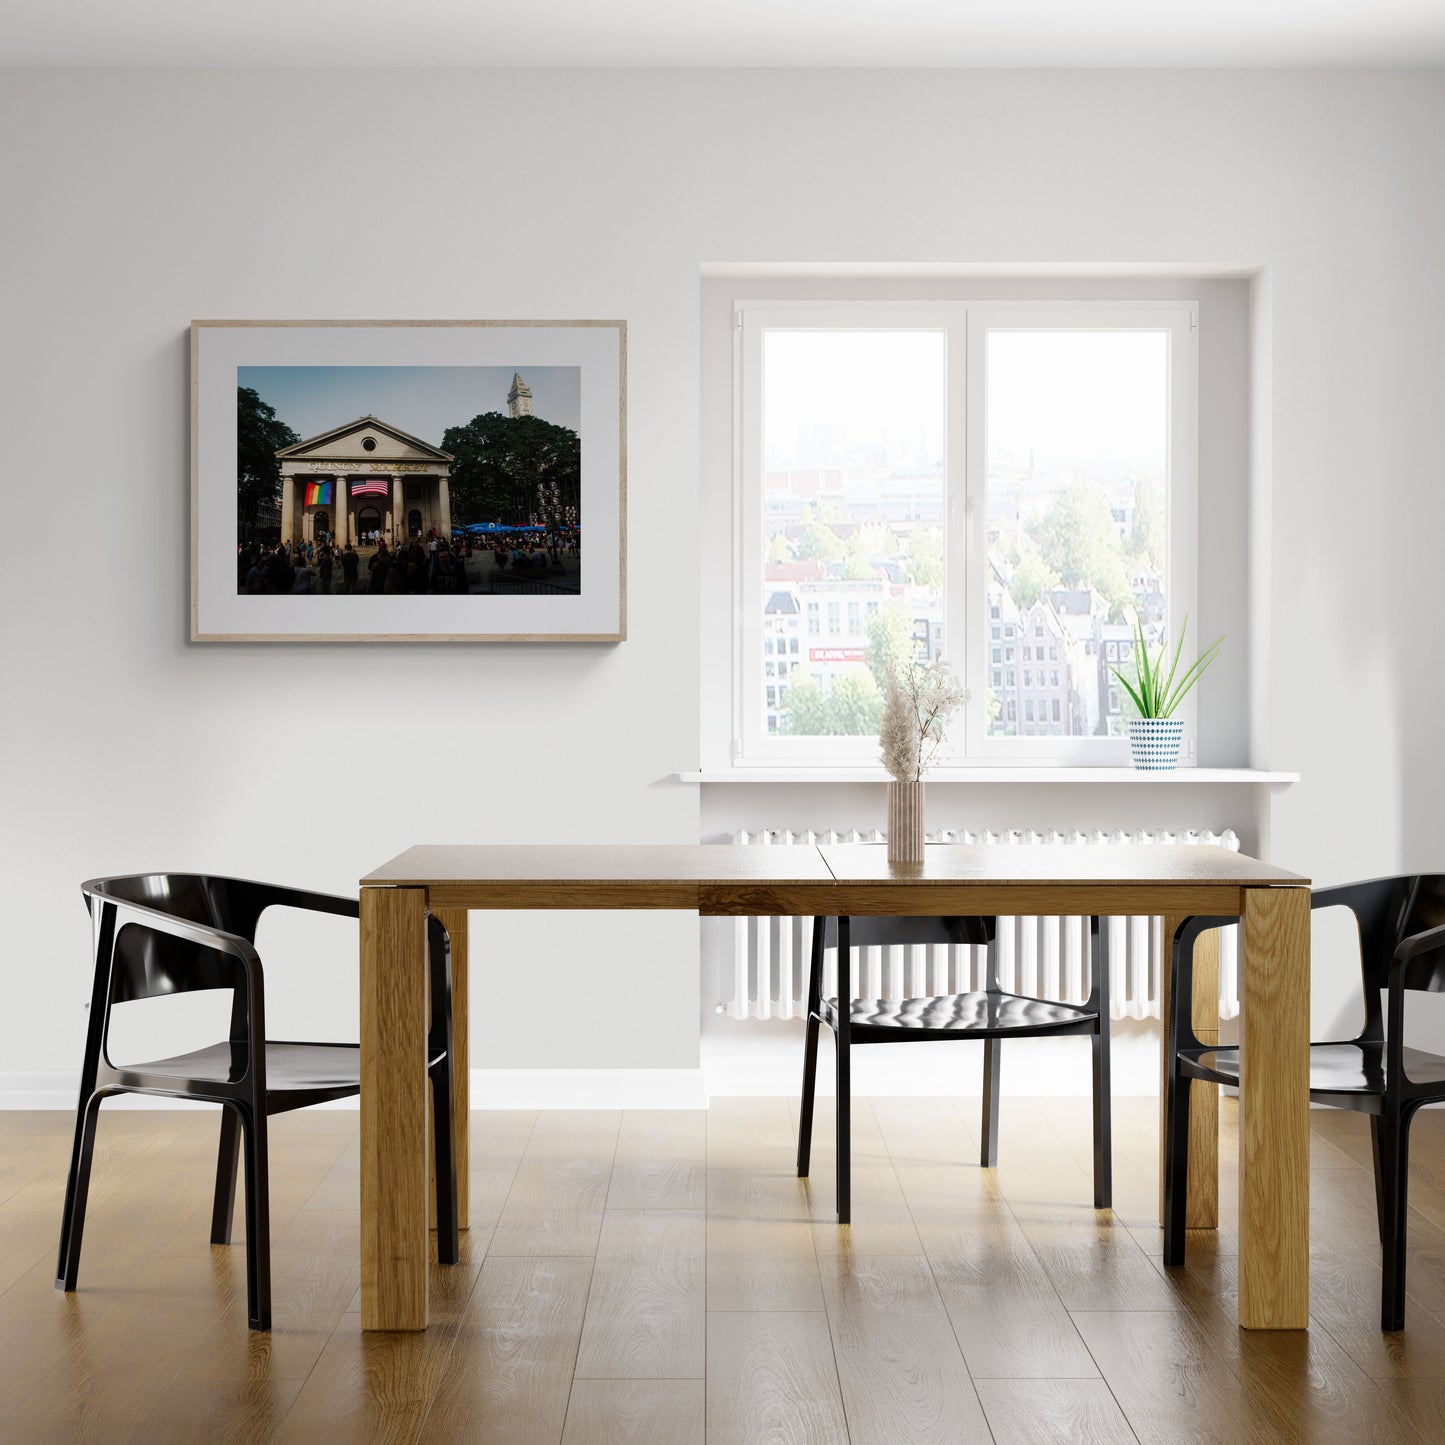 Photograph of Quincy Market in Boston, MA in a Dining Room as Wall Art